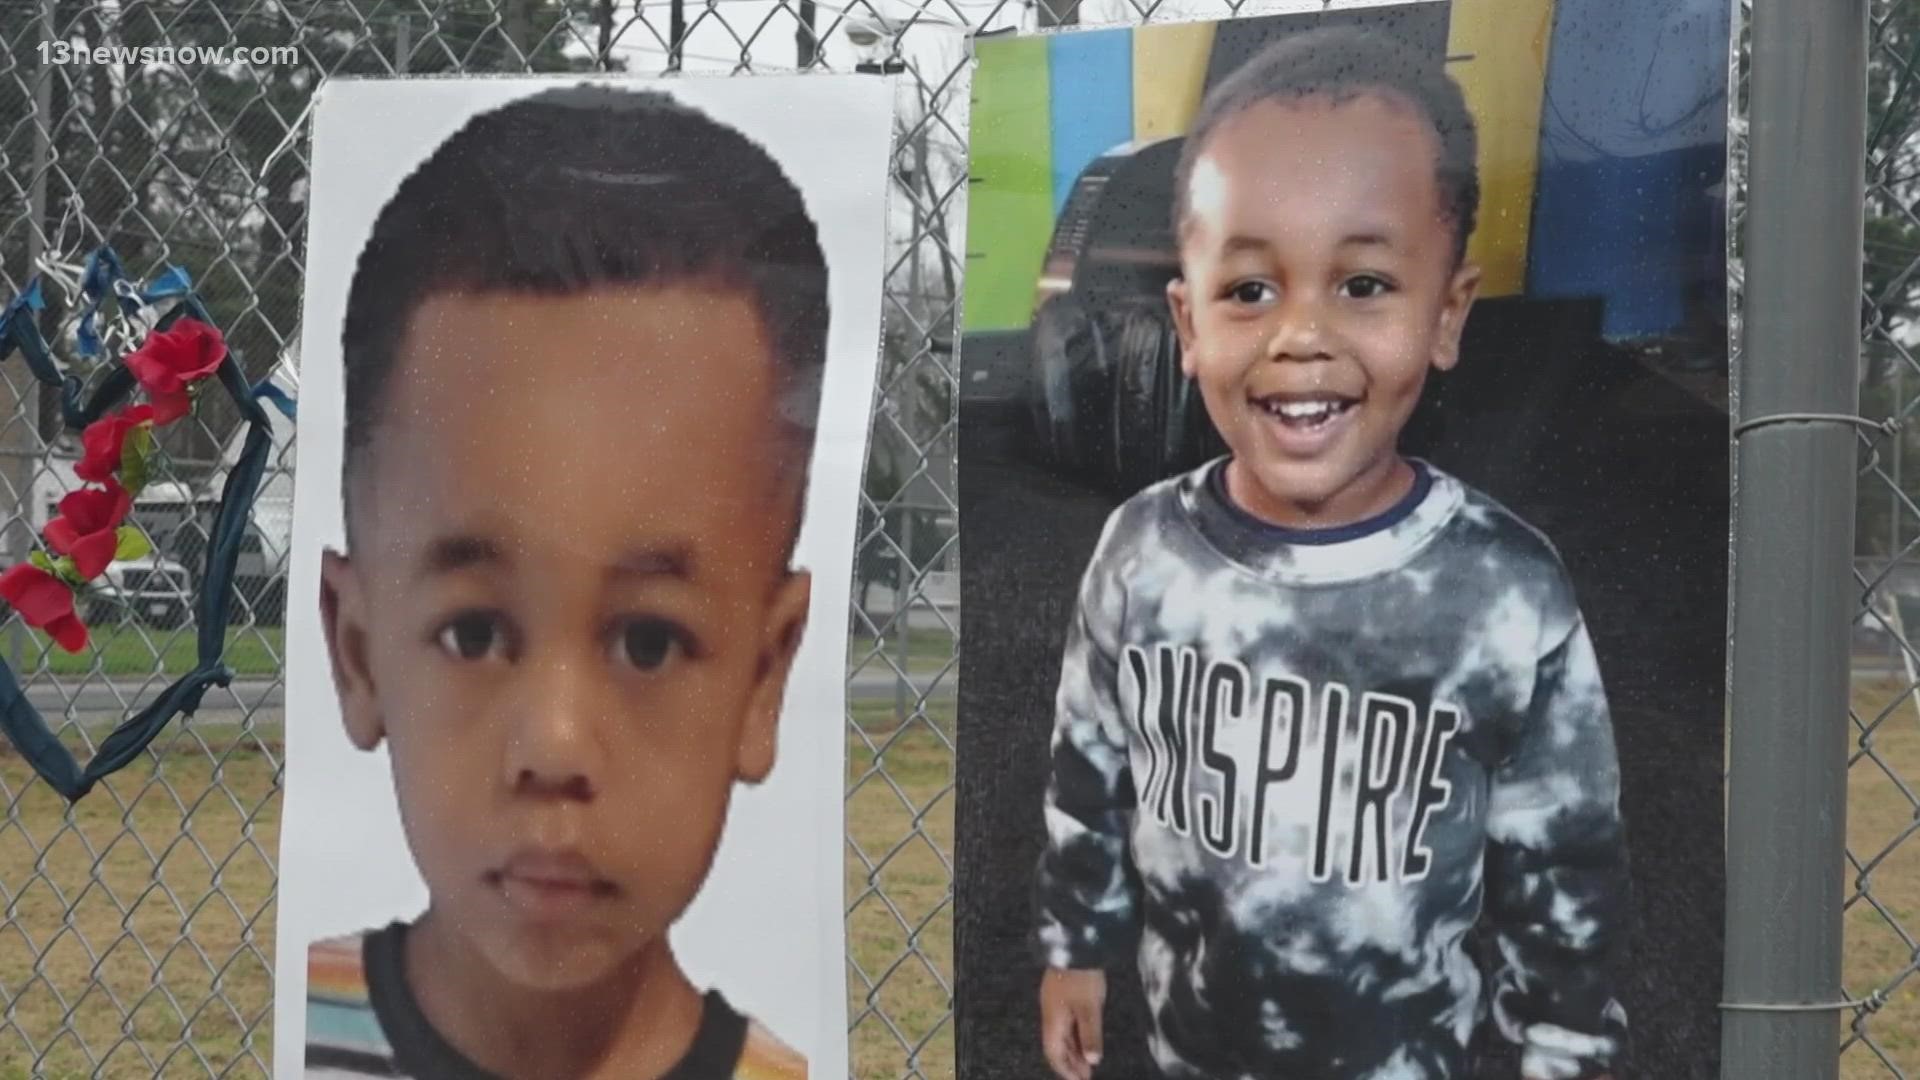 More than 25,000 people have joined a single Facebook page in the hopes of finding the 4-year-old boy.